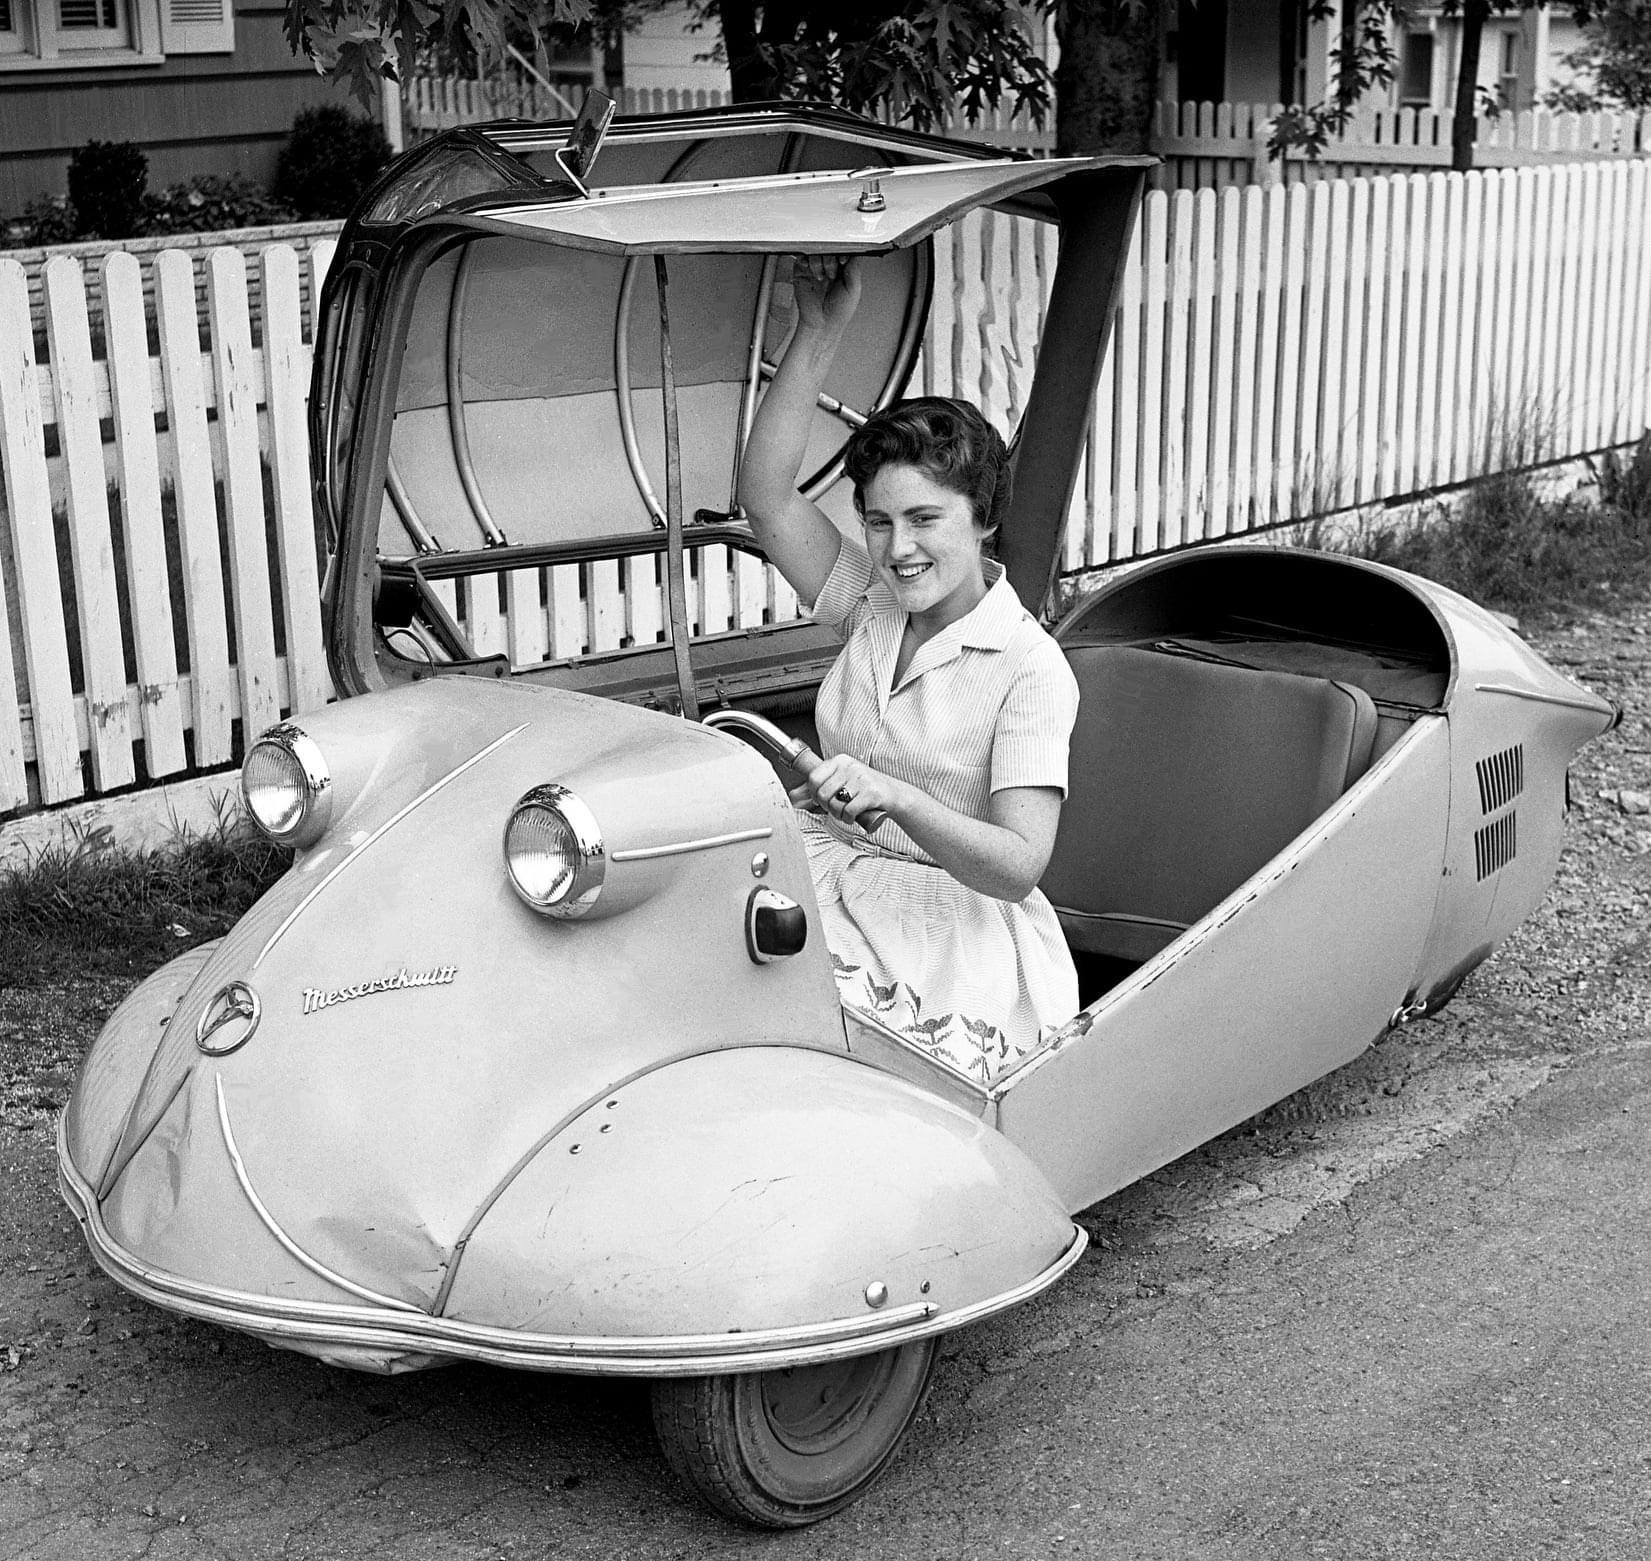 Linda Compton prepares to pulldown the door of her father’s little 1955 model Messerschmitt KR175 car and drive off to Madison High School in Nashville, TN (May 19, 1961).jpg